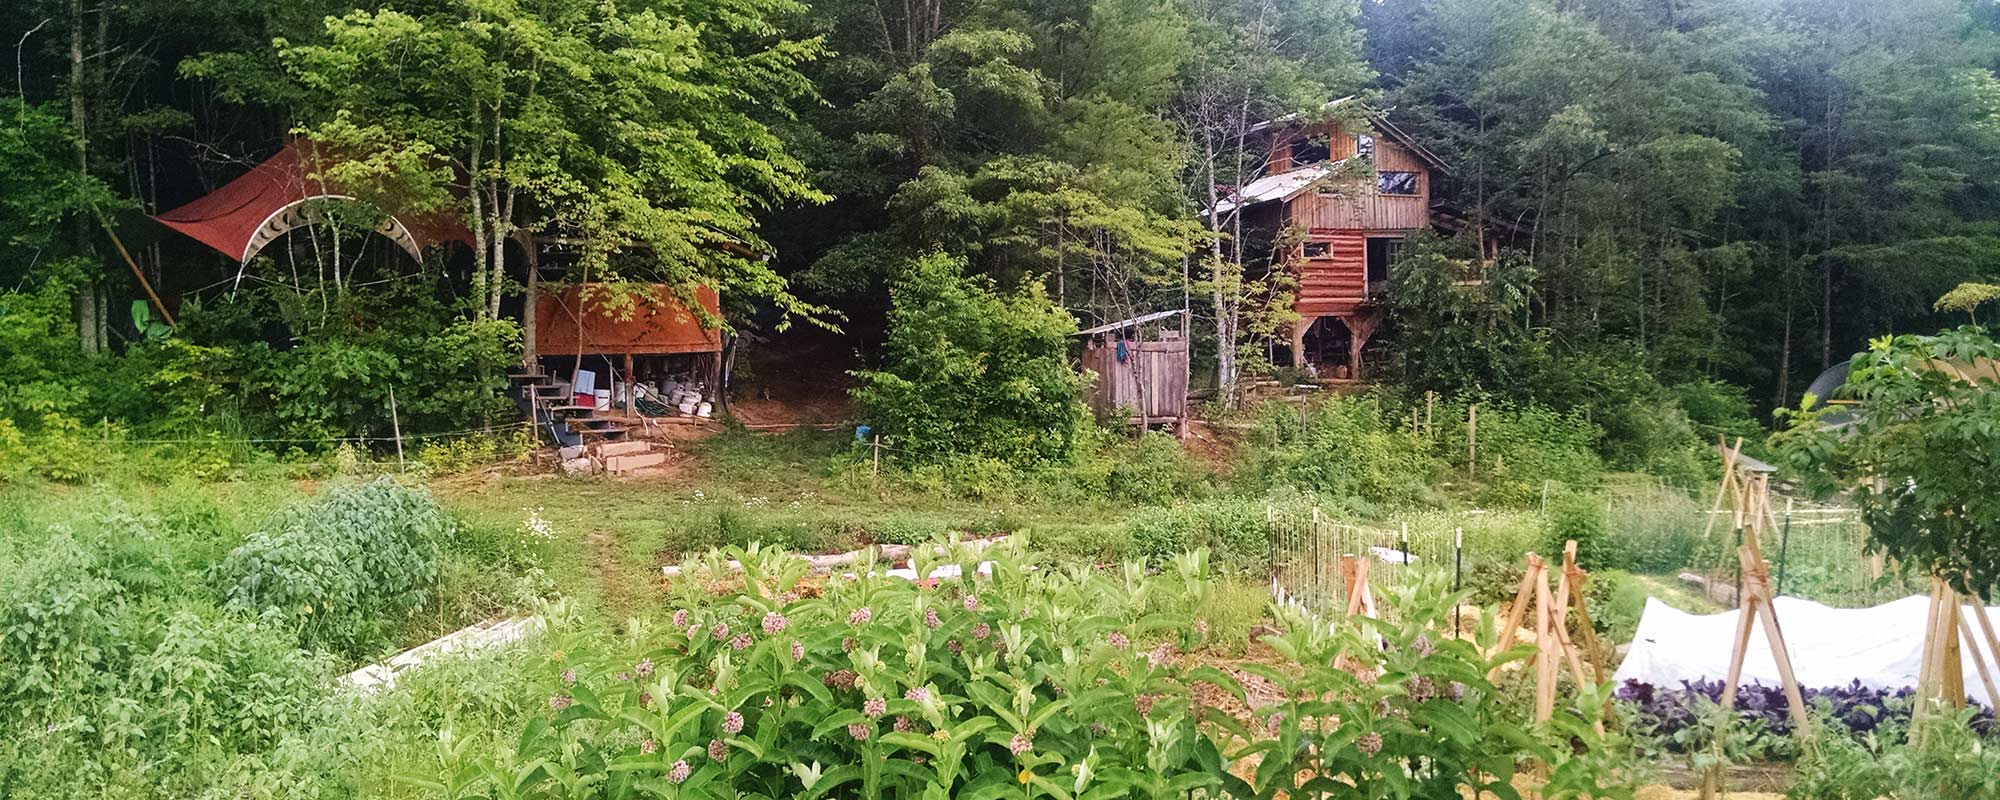 Wild Abundance School for homesteading & permaculture offers a variety of classes and workshops including tiny home and sustainable building, women's carpentry, homesteading essentials, primitive skills and ethical slaughtering.